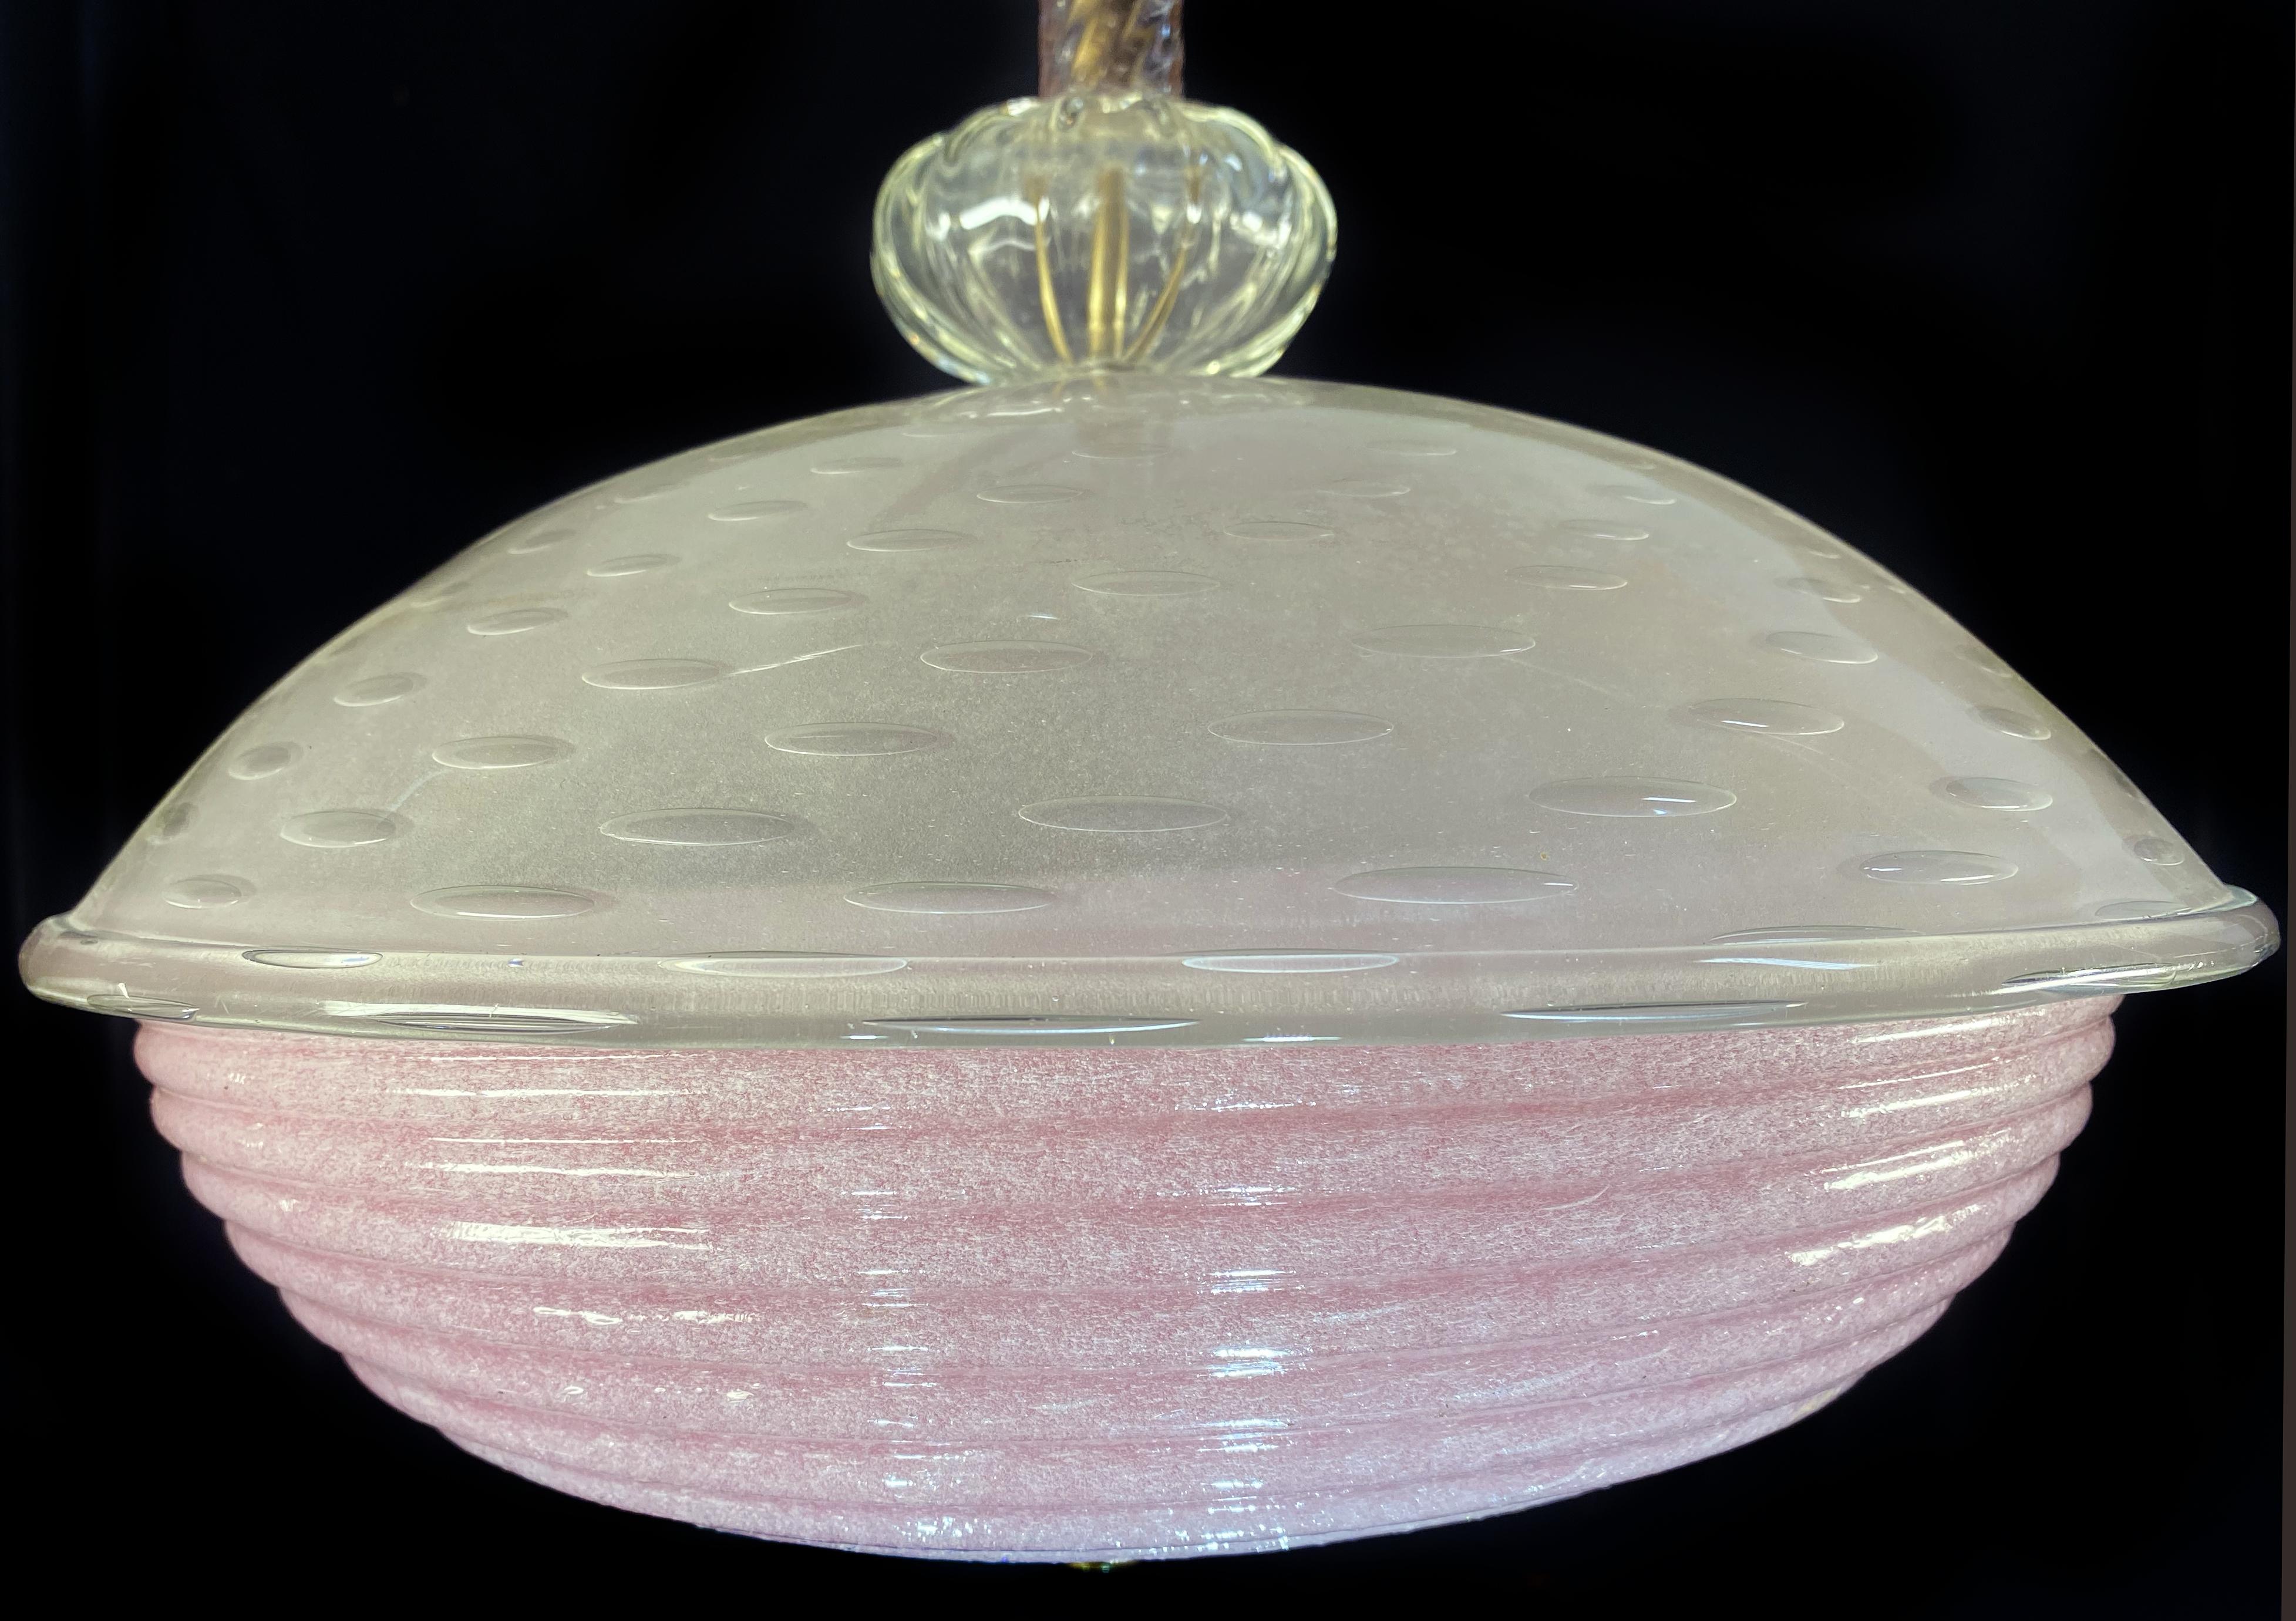 Charming Pink Glass Lantern Chandelier by Barovier & Toso, Murano, 1940 For Sale 2